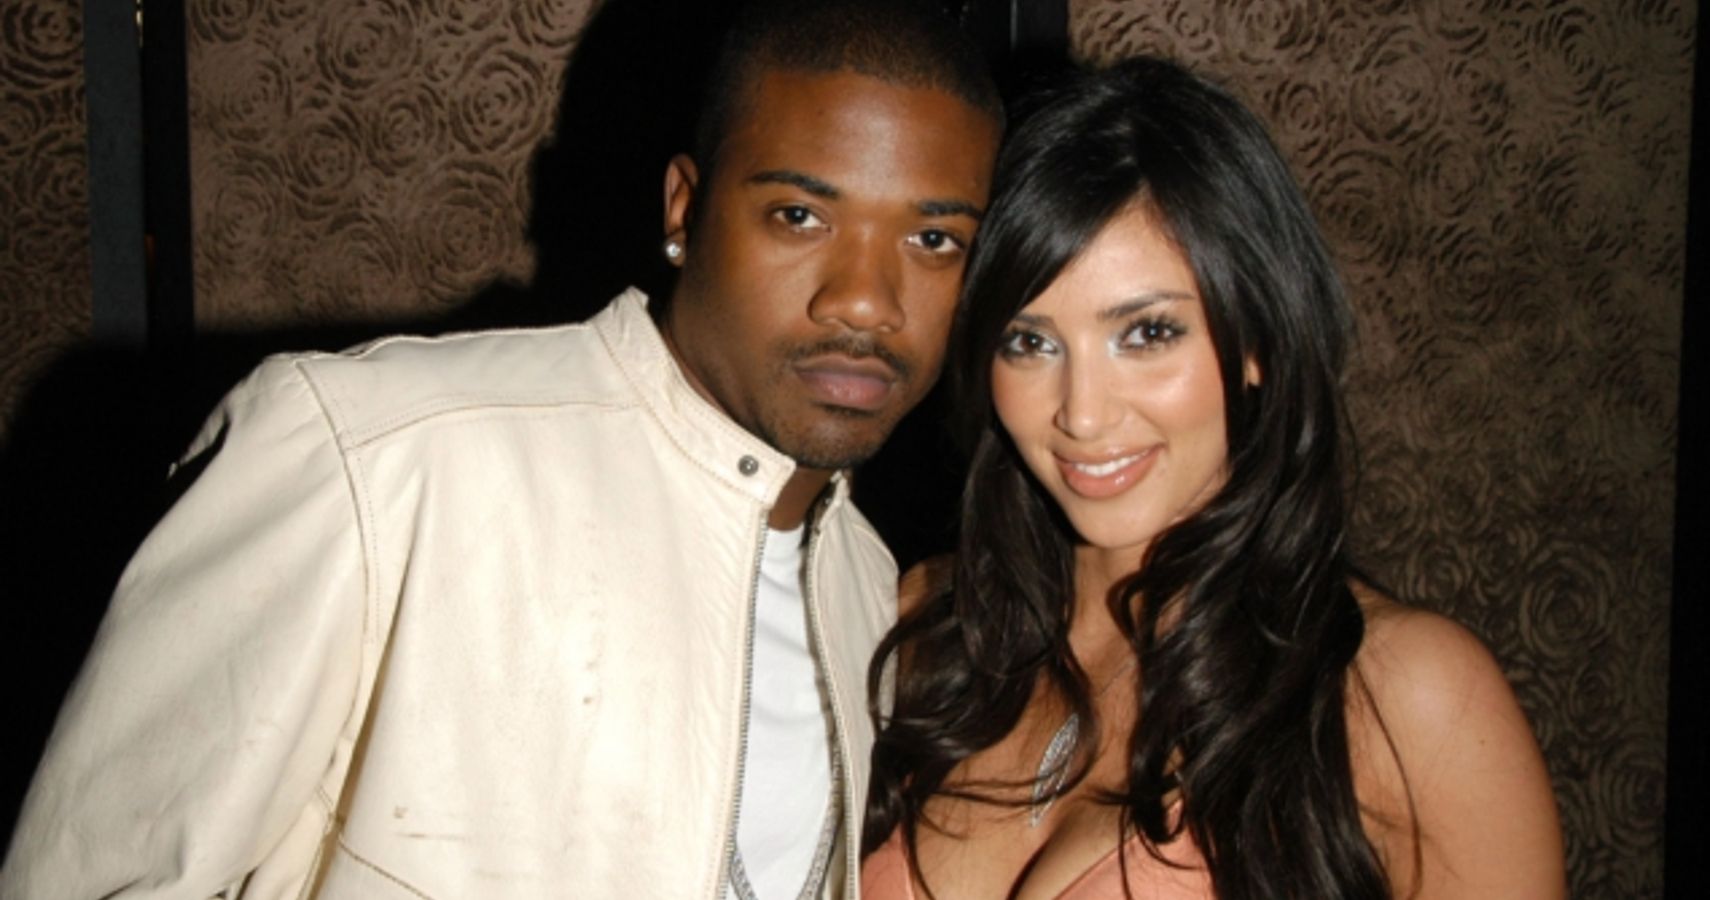 Ray J And Kim Kardashian Allegedly Received An Earnings Email Shortly After Releasing The Sex Tape